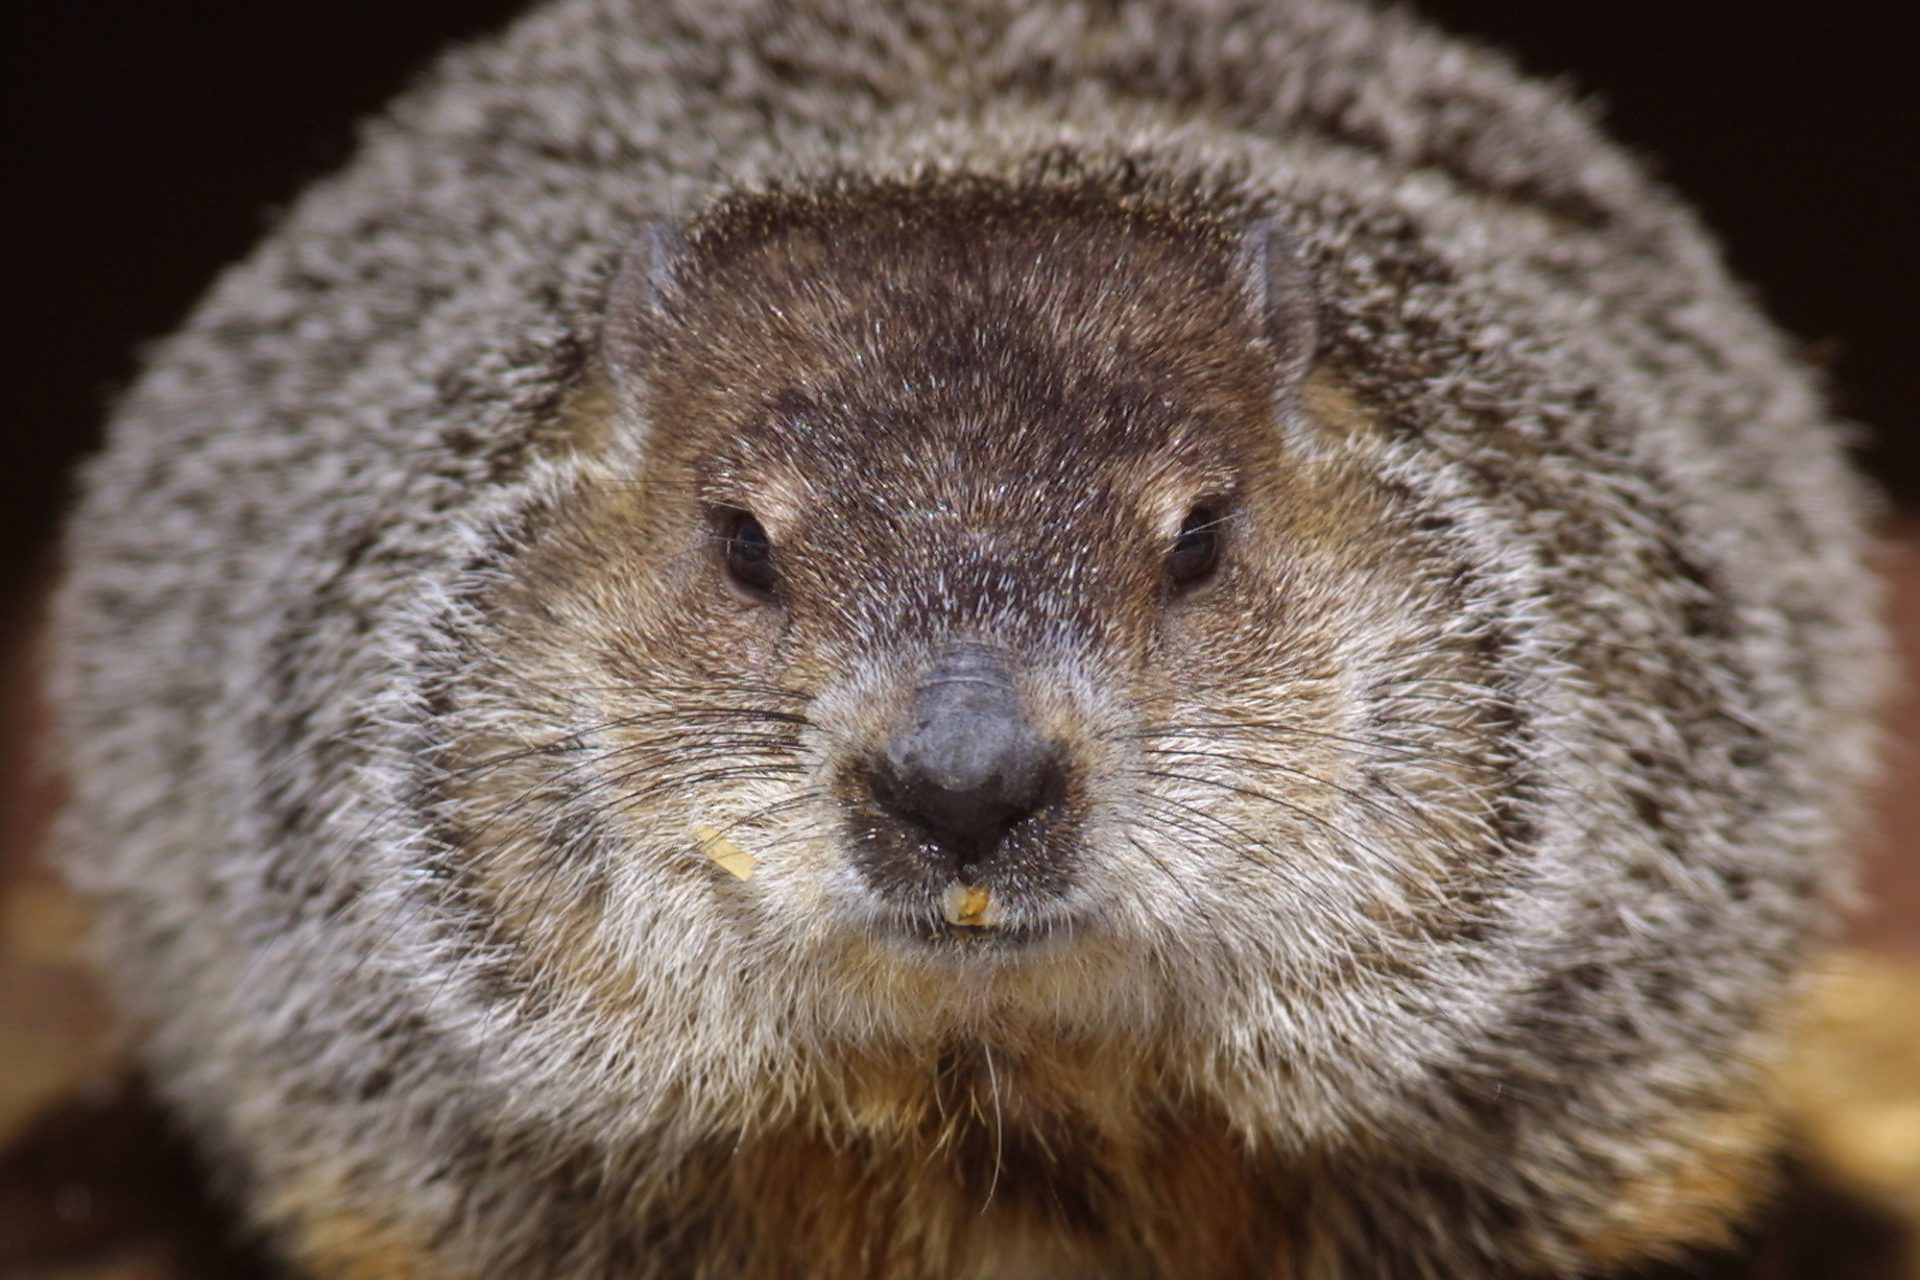 Move over Mr Groundhog! These animals can accurately predict the weather